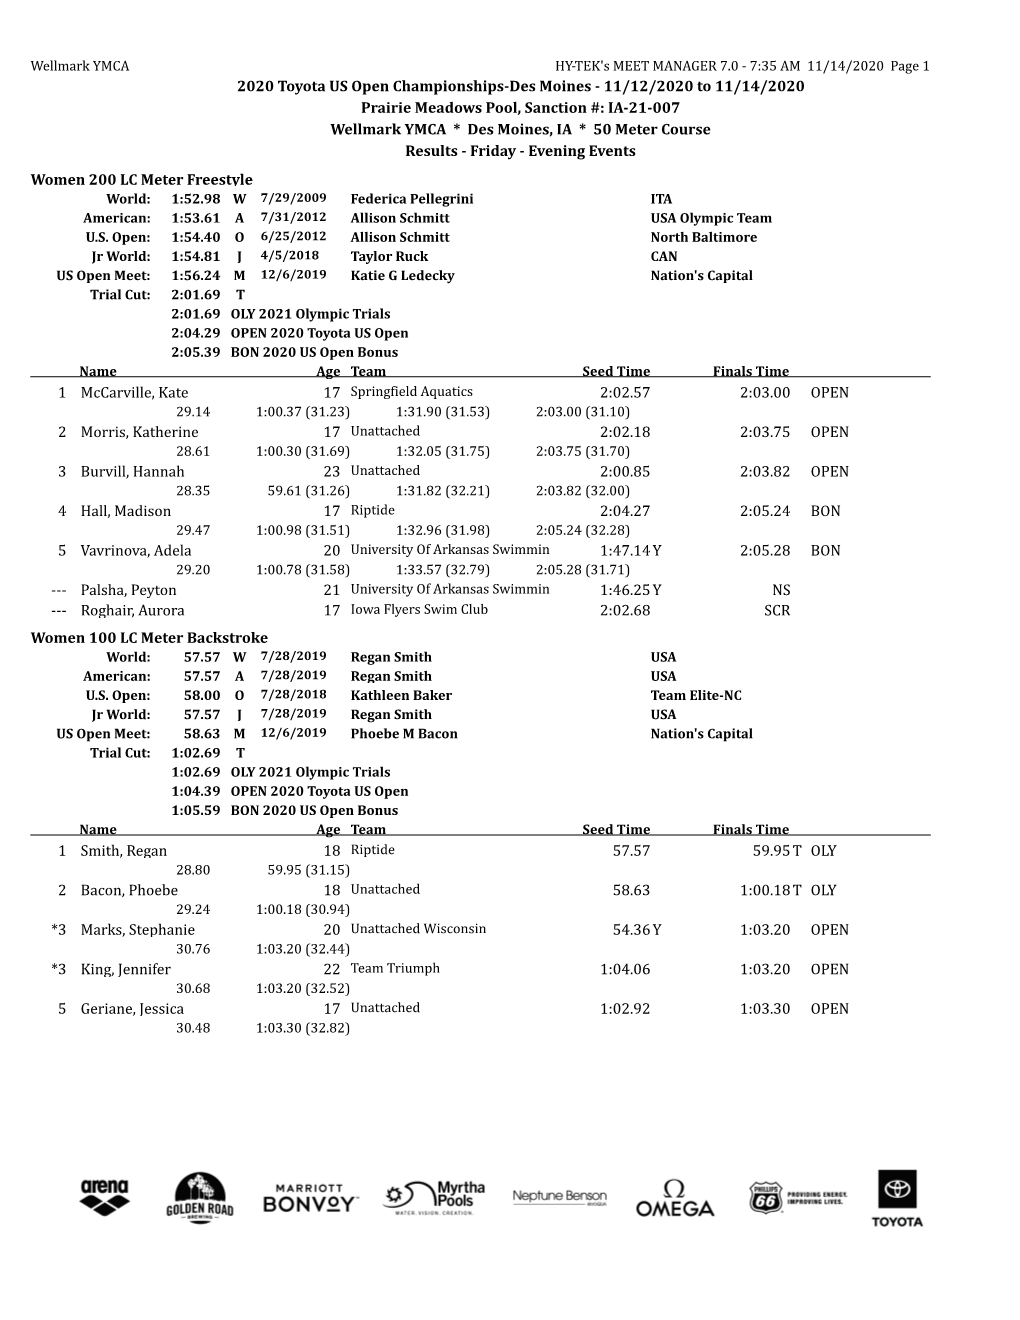 IA-21-007 Wellmark YMCA * Des Moines, IA * 50 Meter Course Results - Friday - Evening Events